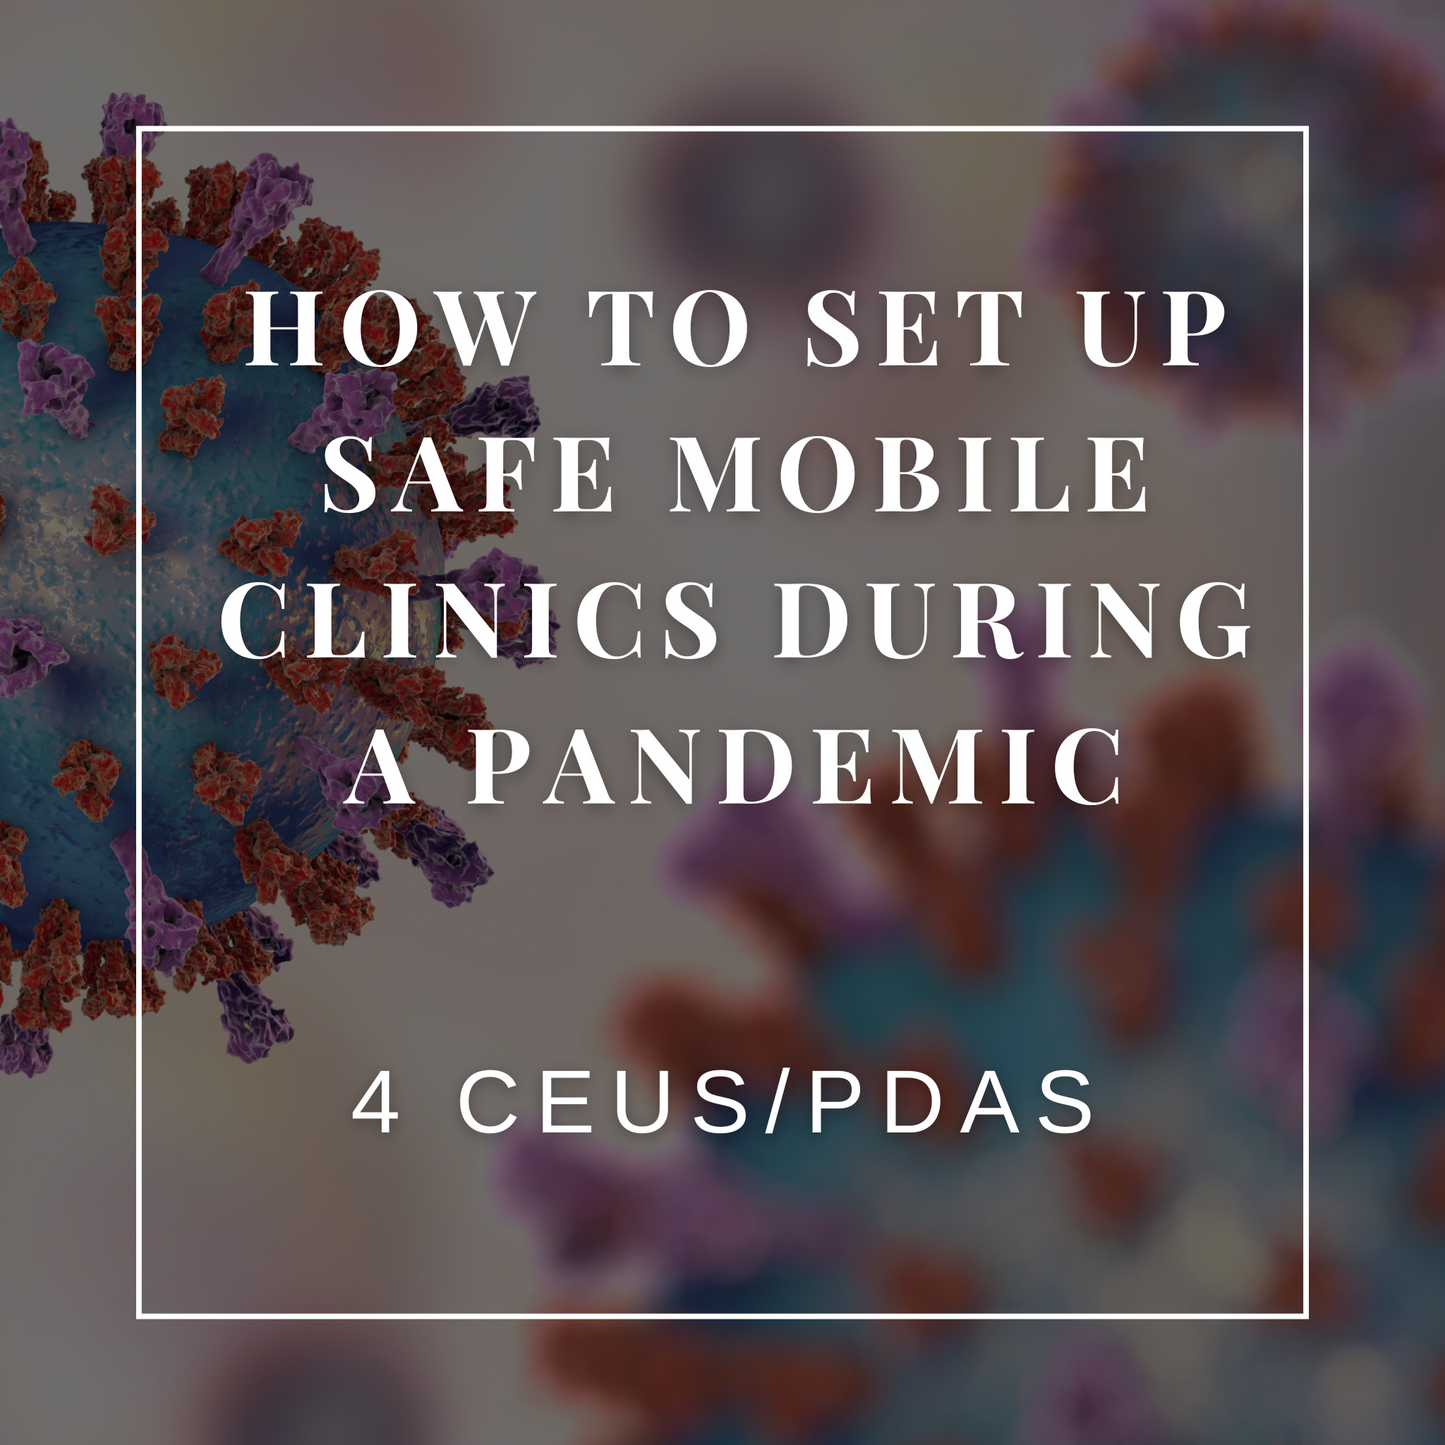 How to Set Up Safe Mobile Clinics During a Pandemic